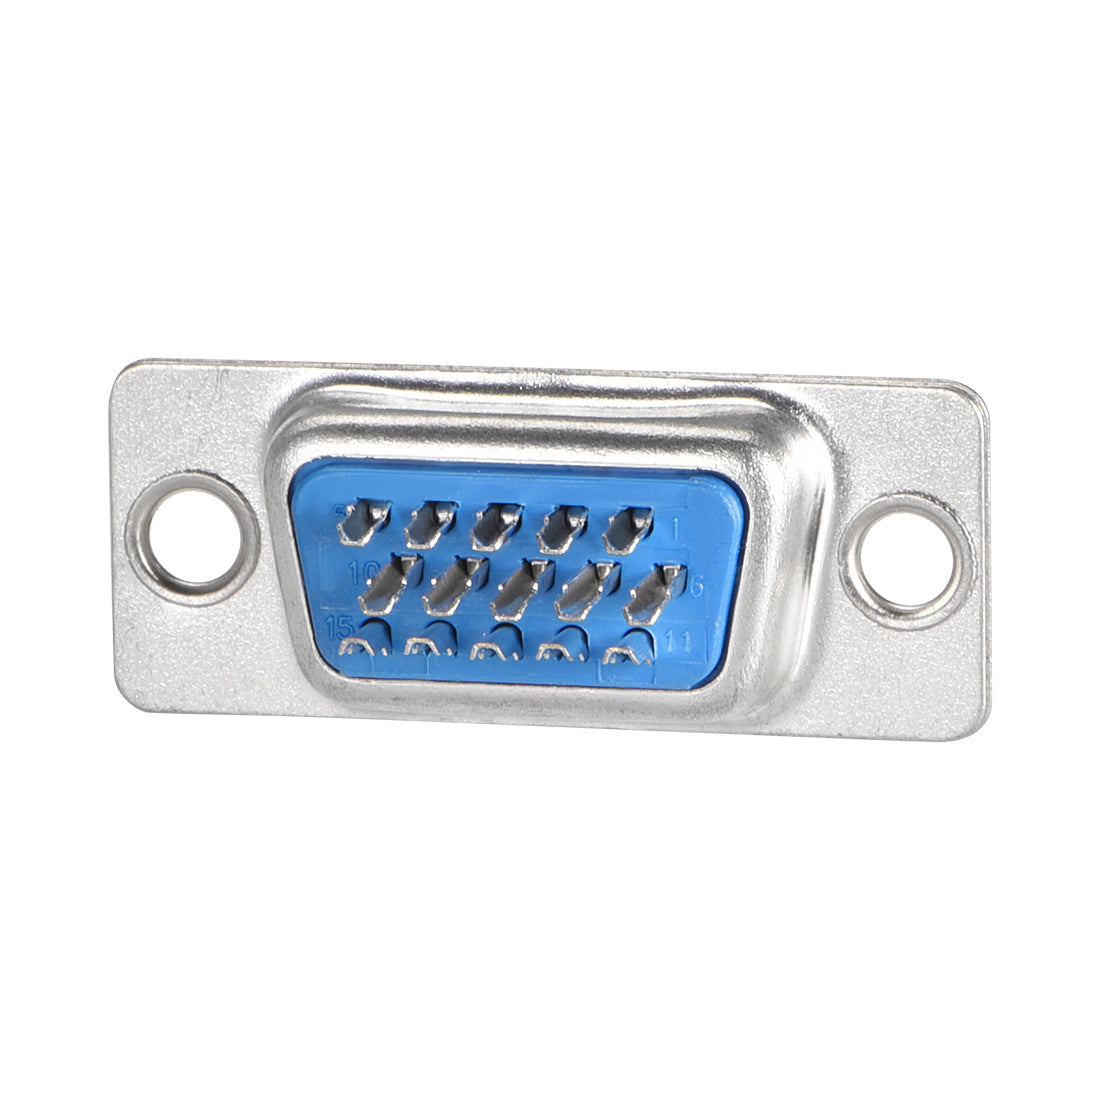 uxcell Uxcell D-sub Connector Male Plug 15-pin 3-row Port Terminal Breakout for Mechanical Equipment CNC Computers Blue 10pcs